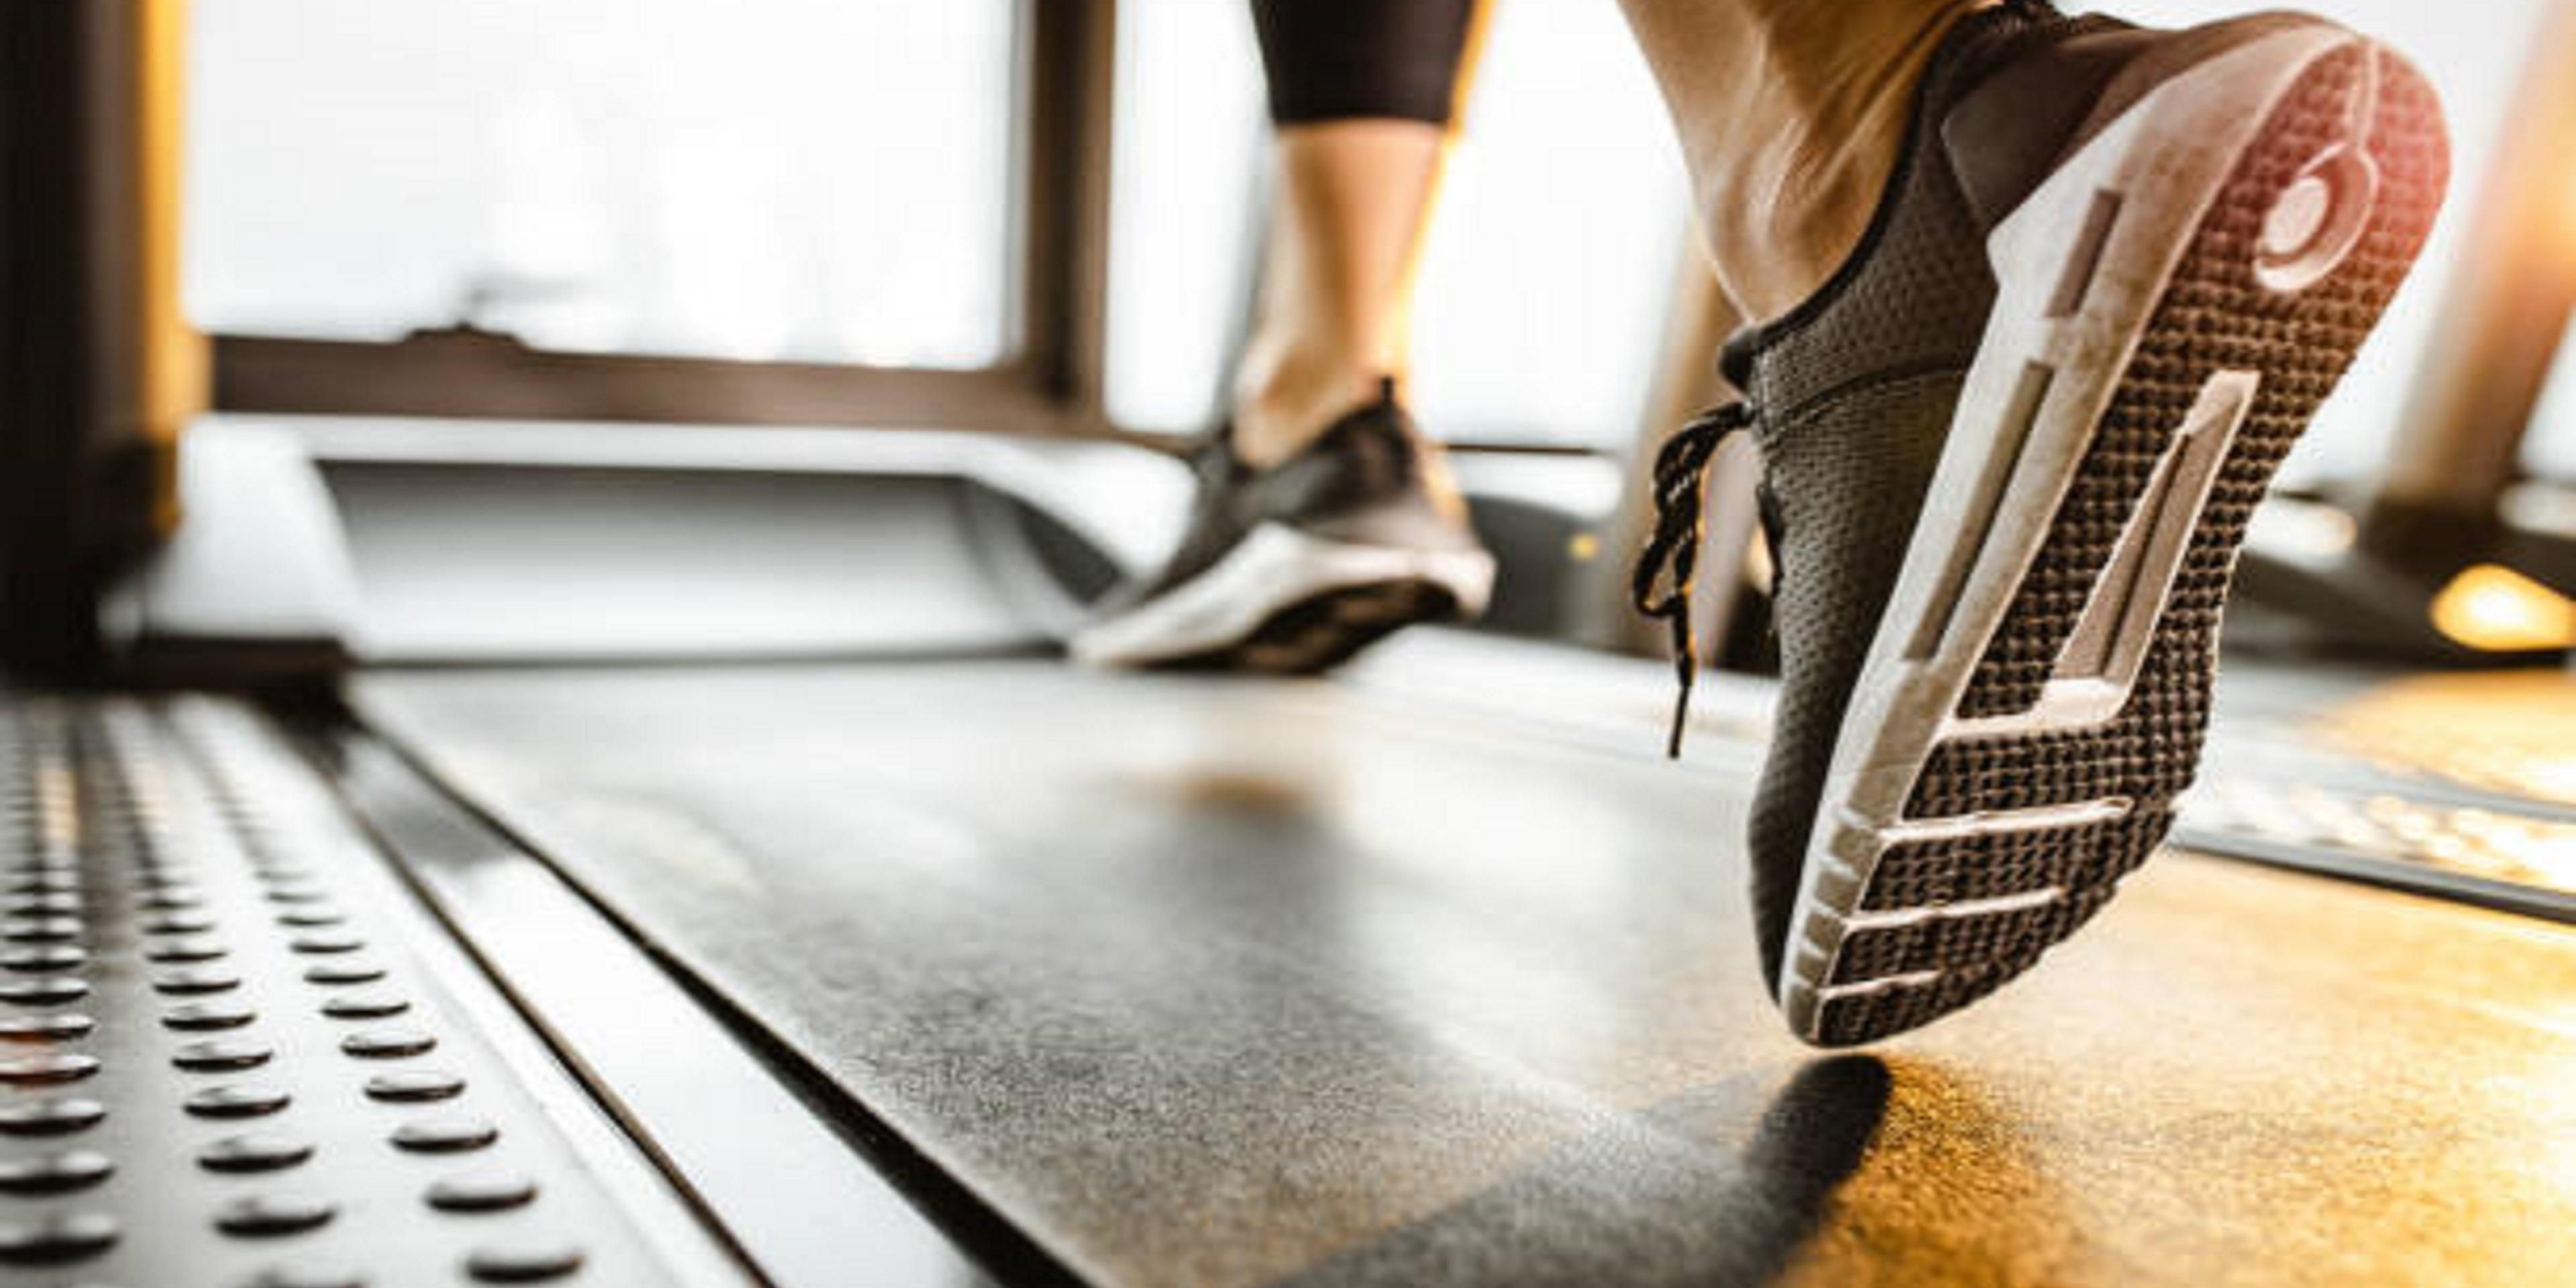 Get your sweat on in our complimentary, fully-equipped Fitness Center with free weights, treadmill, stationary bike, stair stepper. Open 24/7.